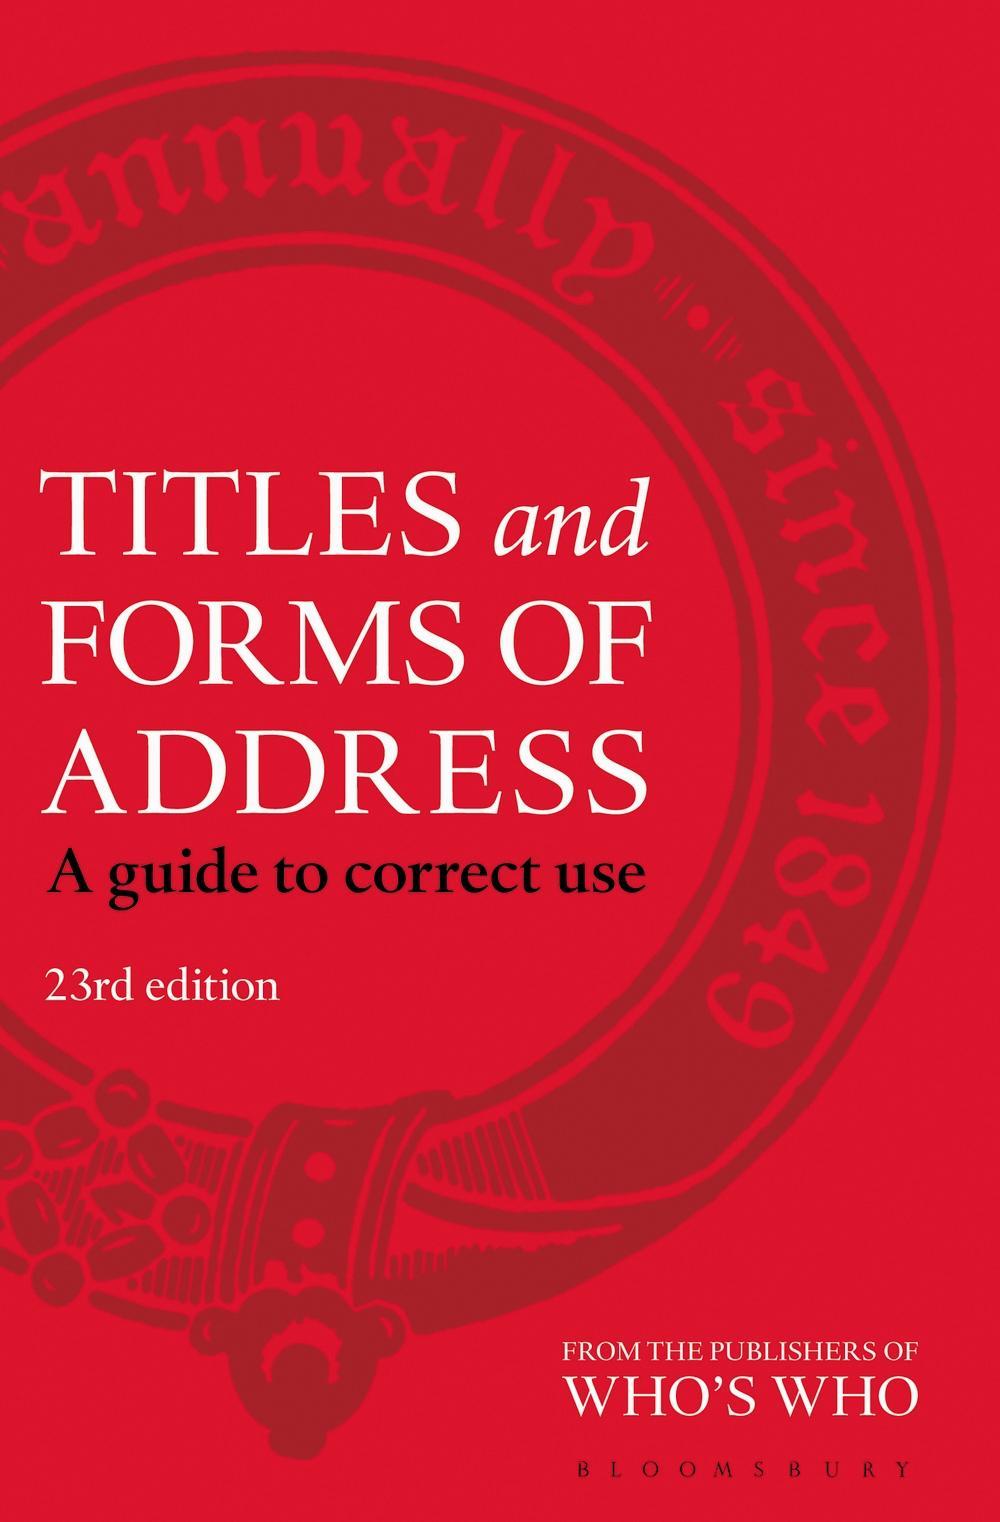 Titles and Forms of Address